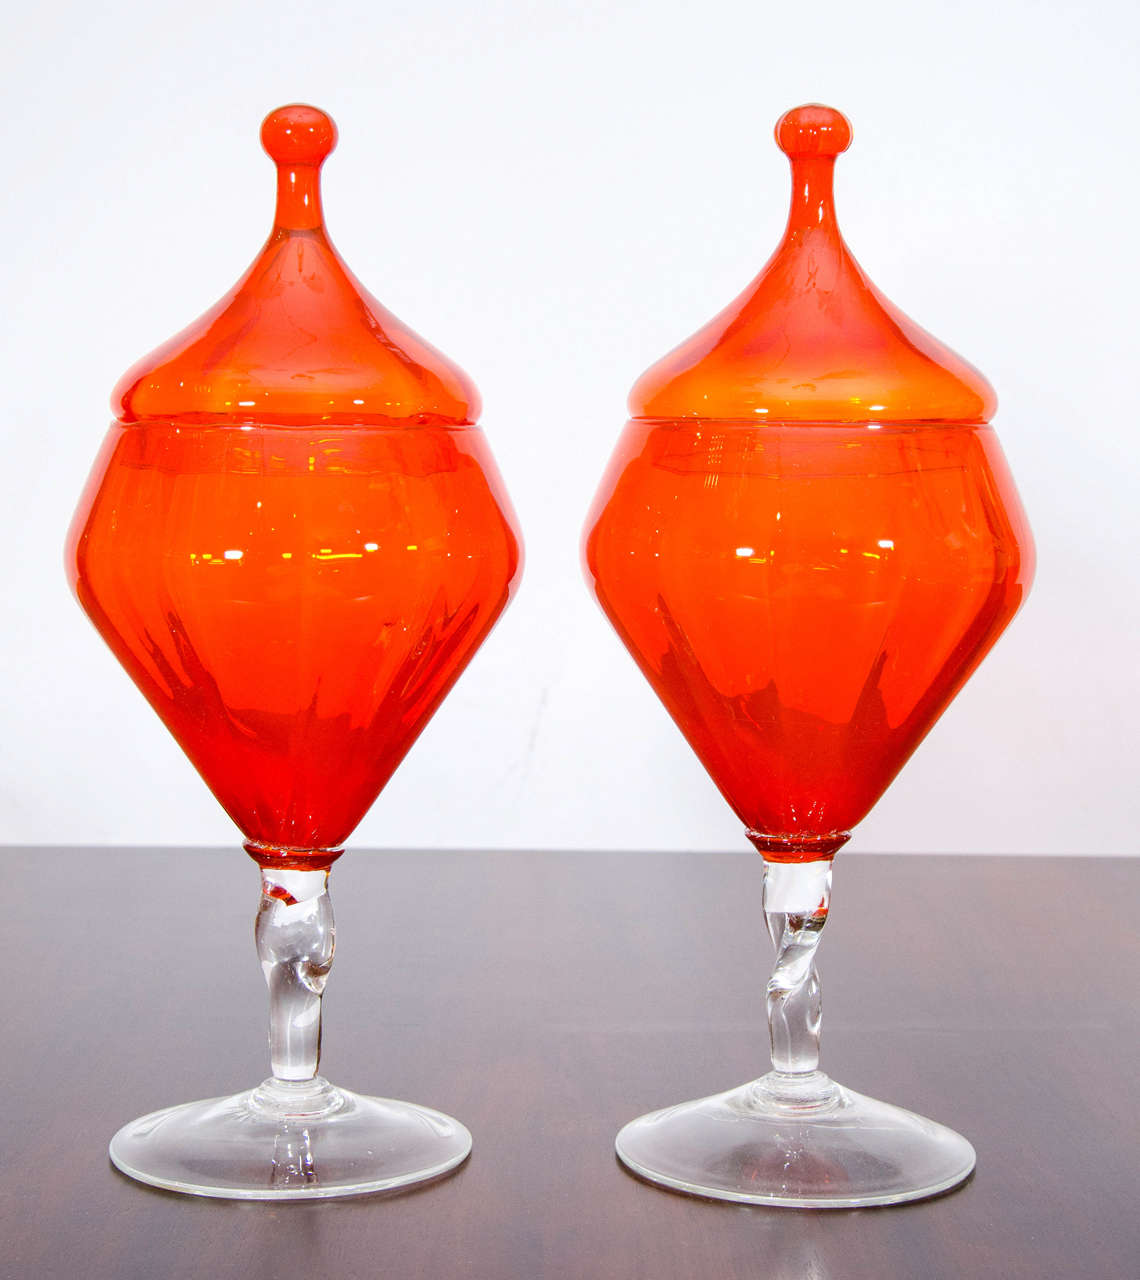 Beautiful pair of apothecary jars by Empoli in a striking orange with clear glass twisted stems. Please contact for location.